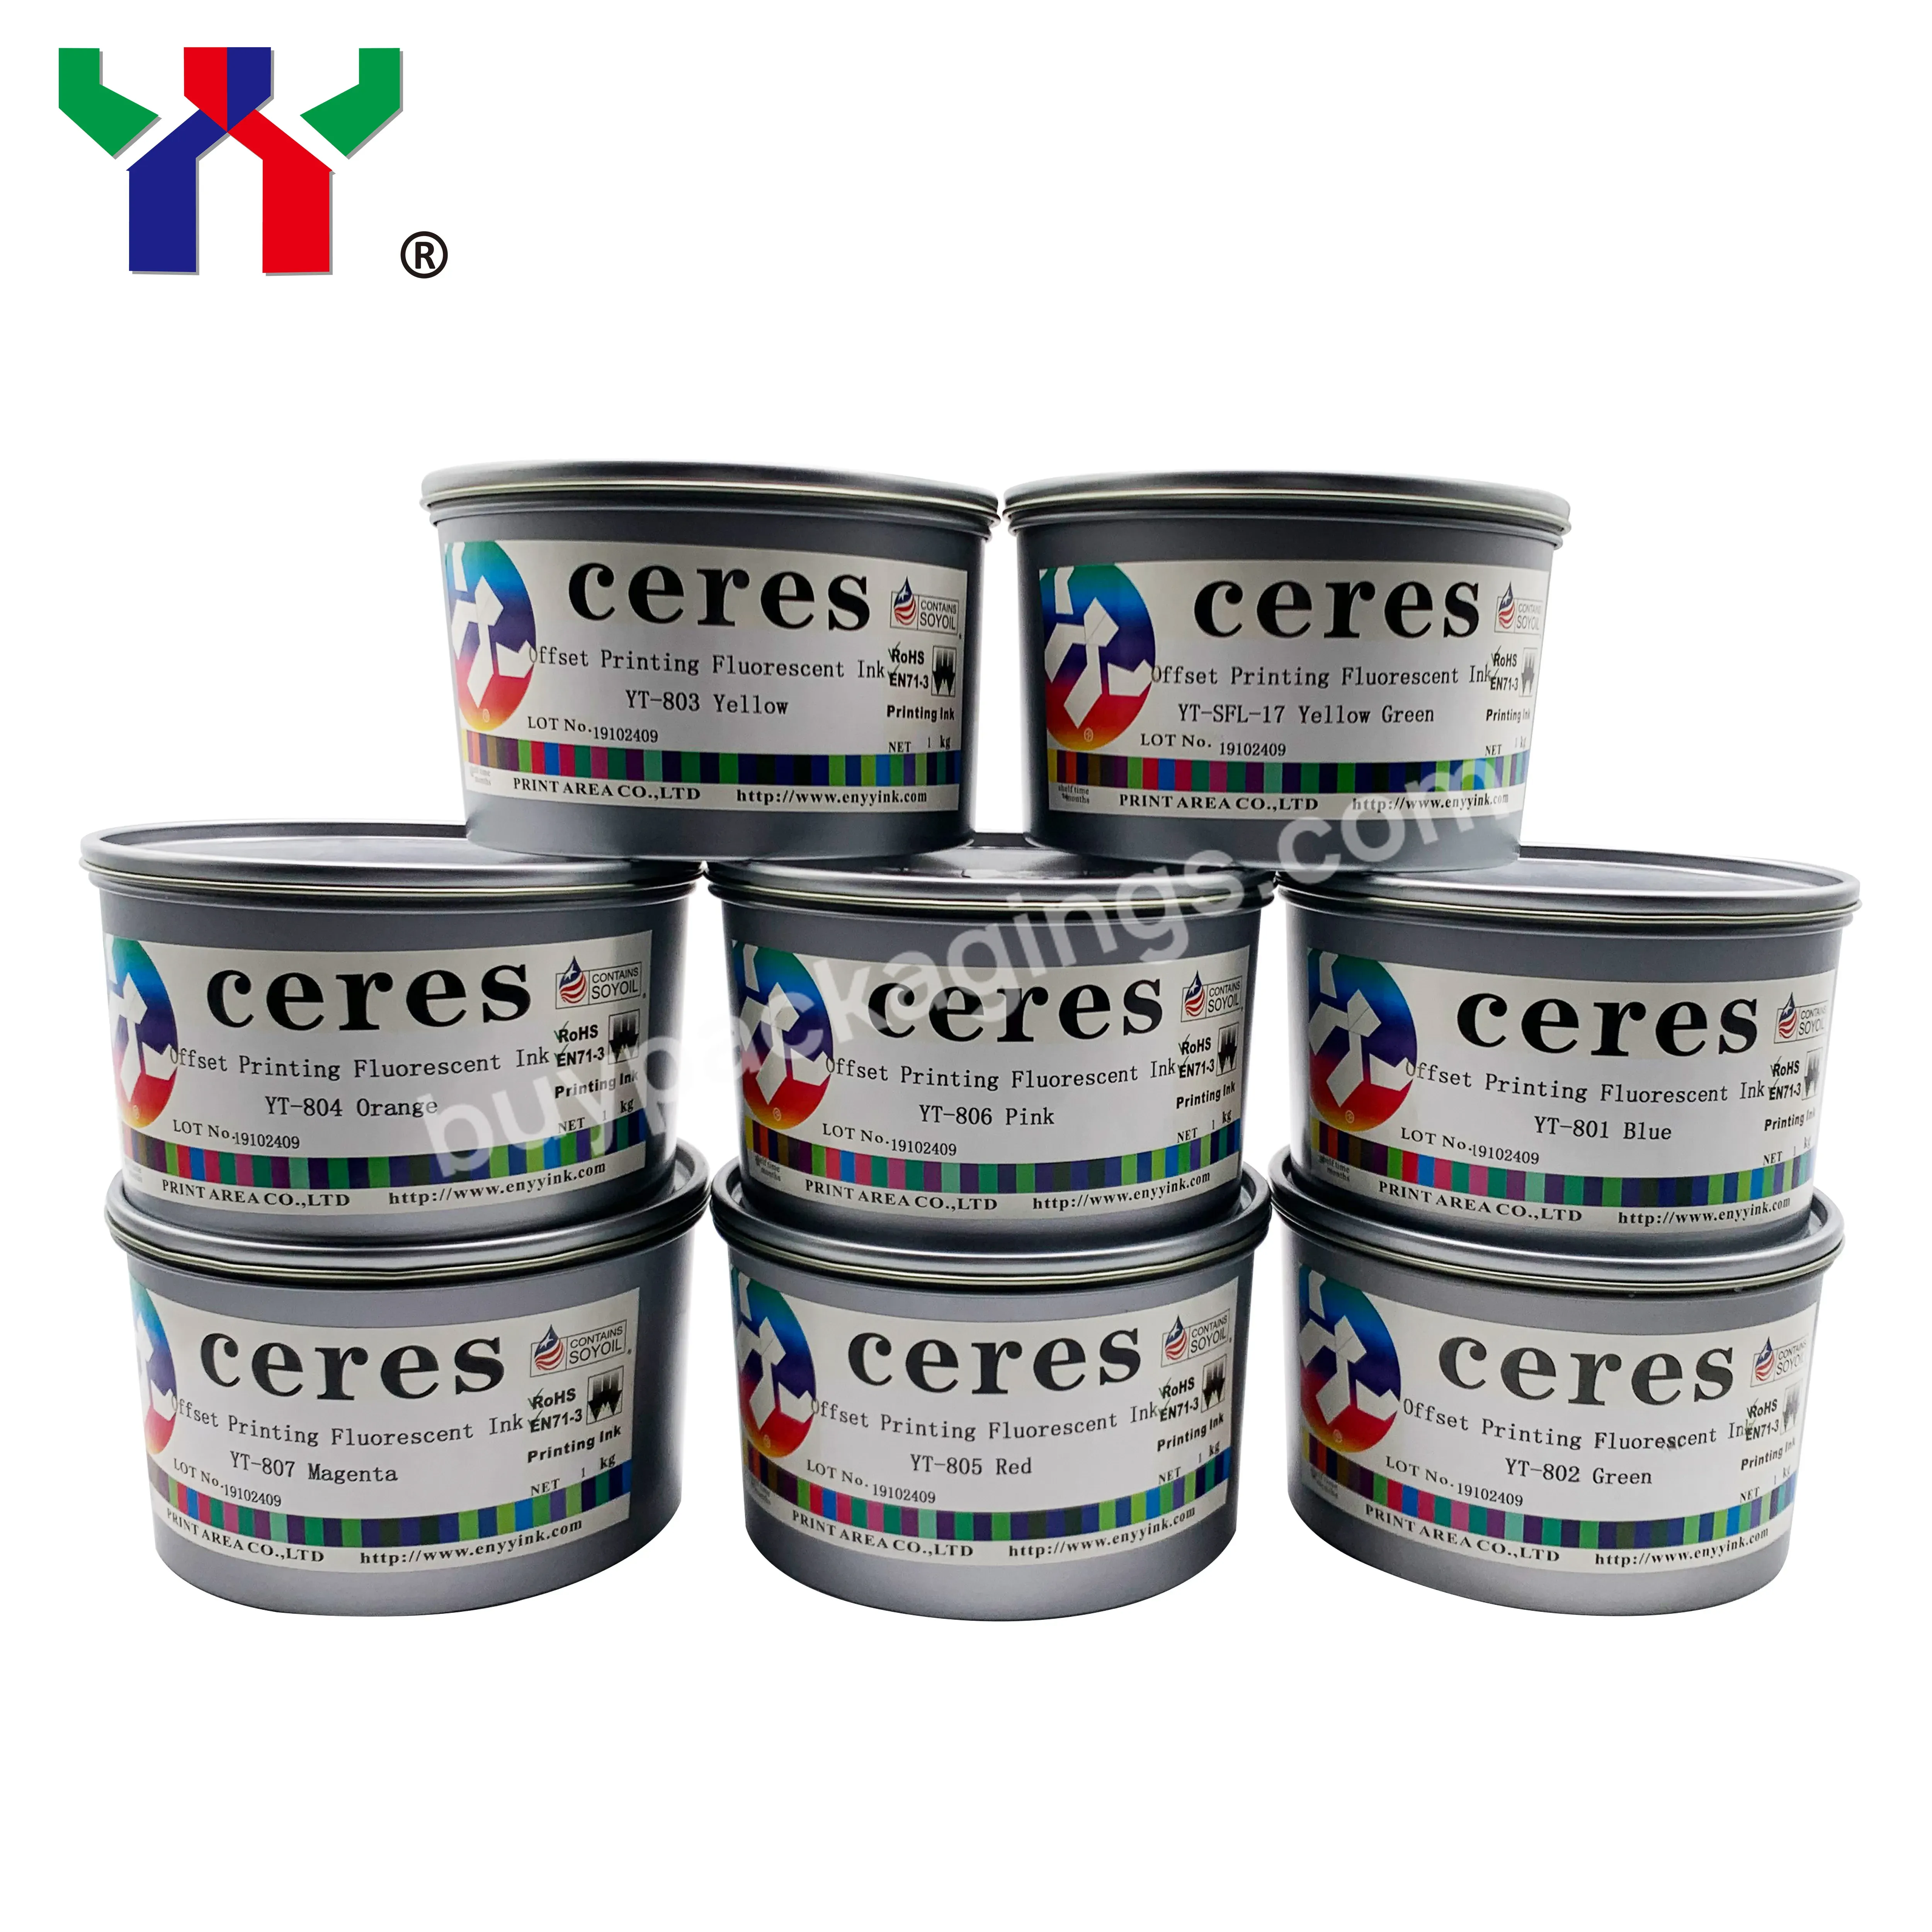 High Quality Ceres Offset Printing Fluorescent Ink,Air Dry - Yt-805 Red,1 Kg/can - Buy Fluorescent Ink For Offset Printer,Fluorescent Ink,Fluorescent Offset Printing Ink.